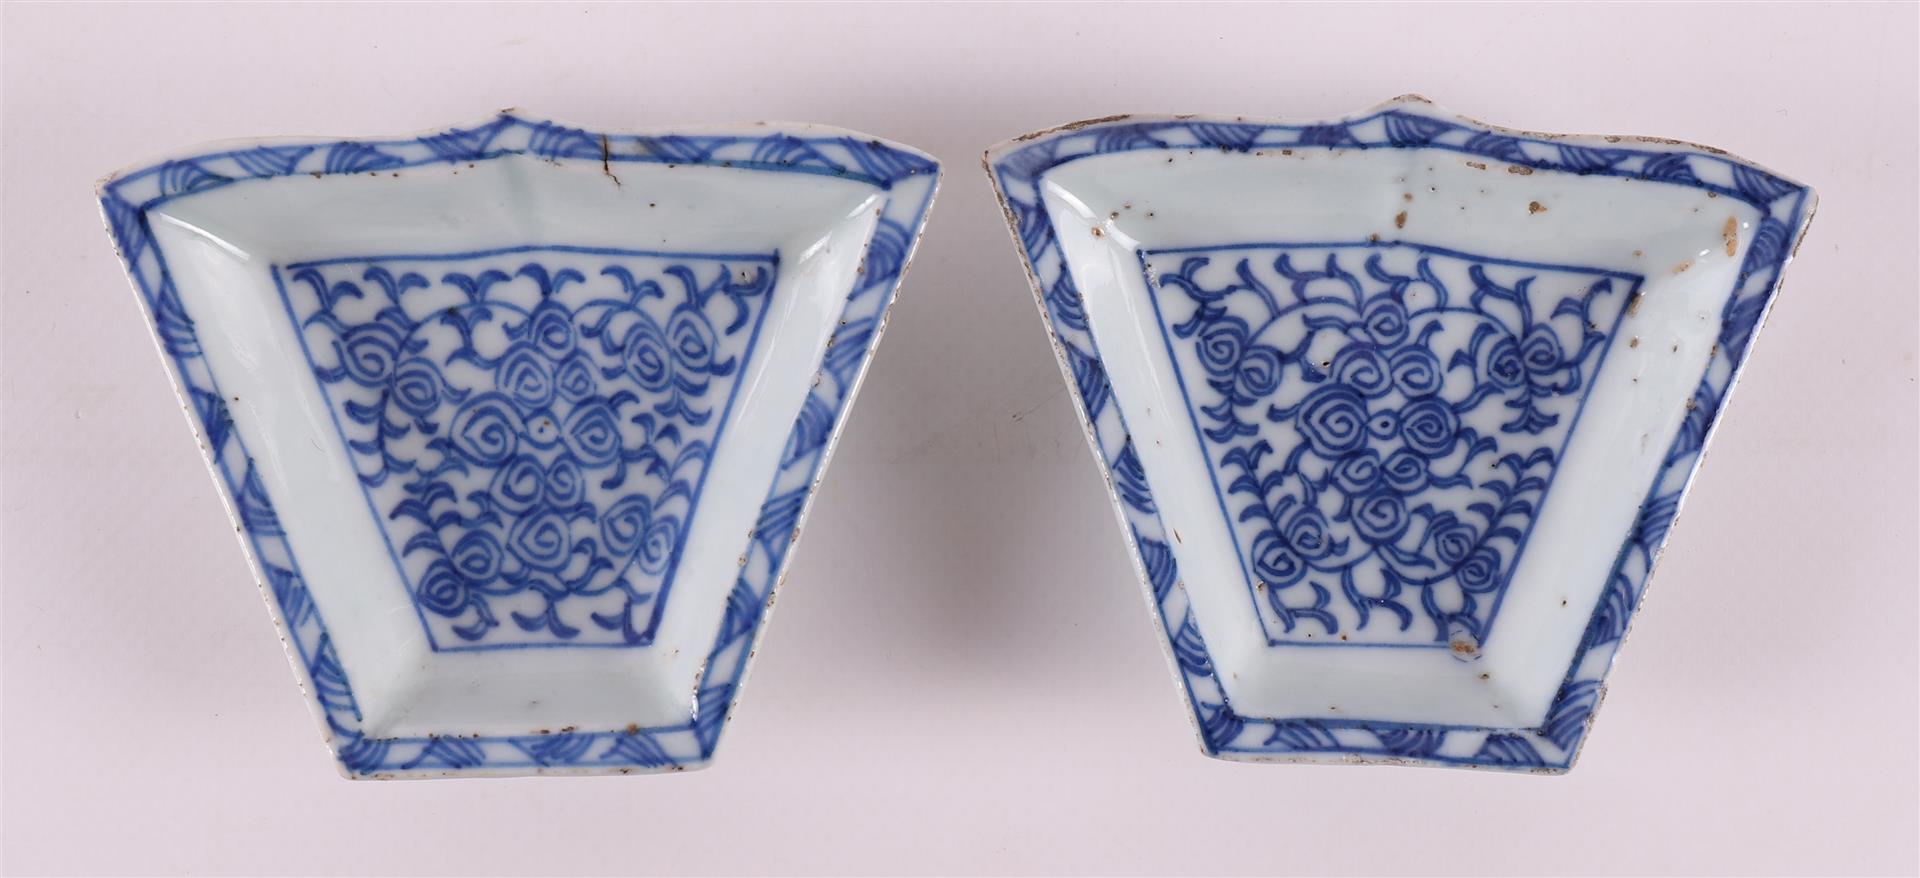 A blue and white porcelain hors d'oevre set, China, Kangxi, around 1700. - Image 3 of 12